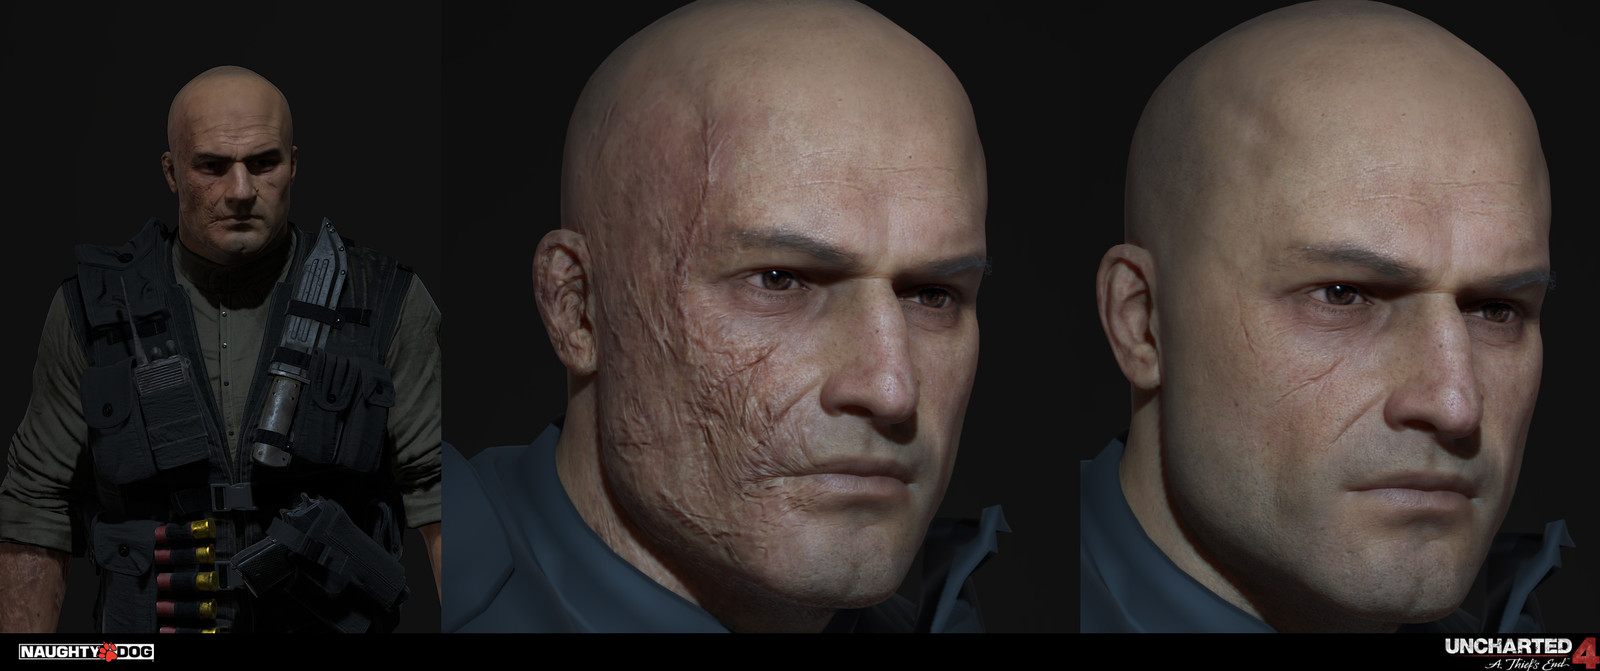 Lazarevic for U4 -WIP - head from scratch - some of the clothing re-used from uncharted 2 - re-textured and materials.